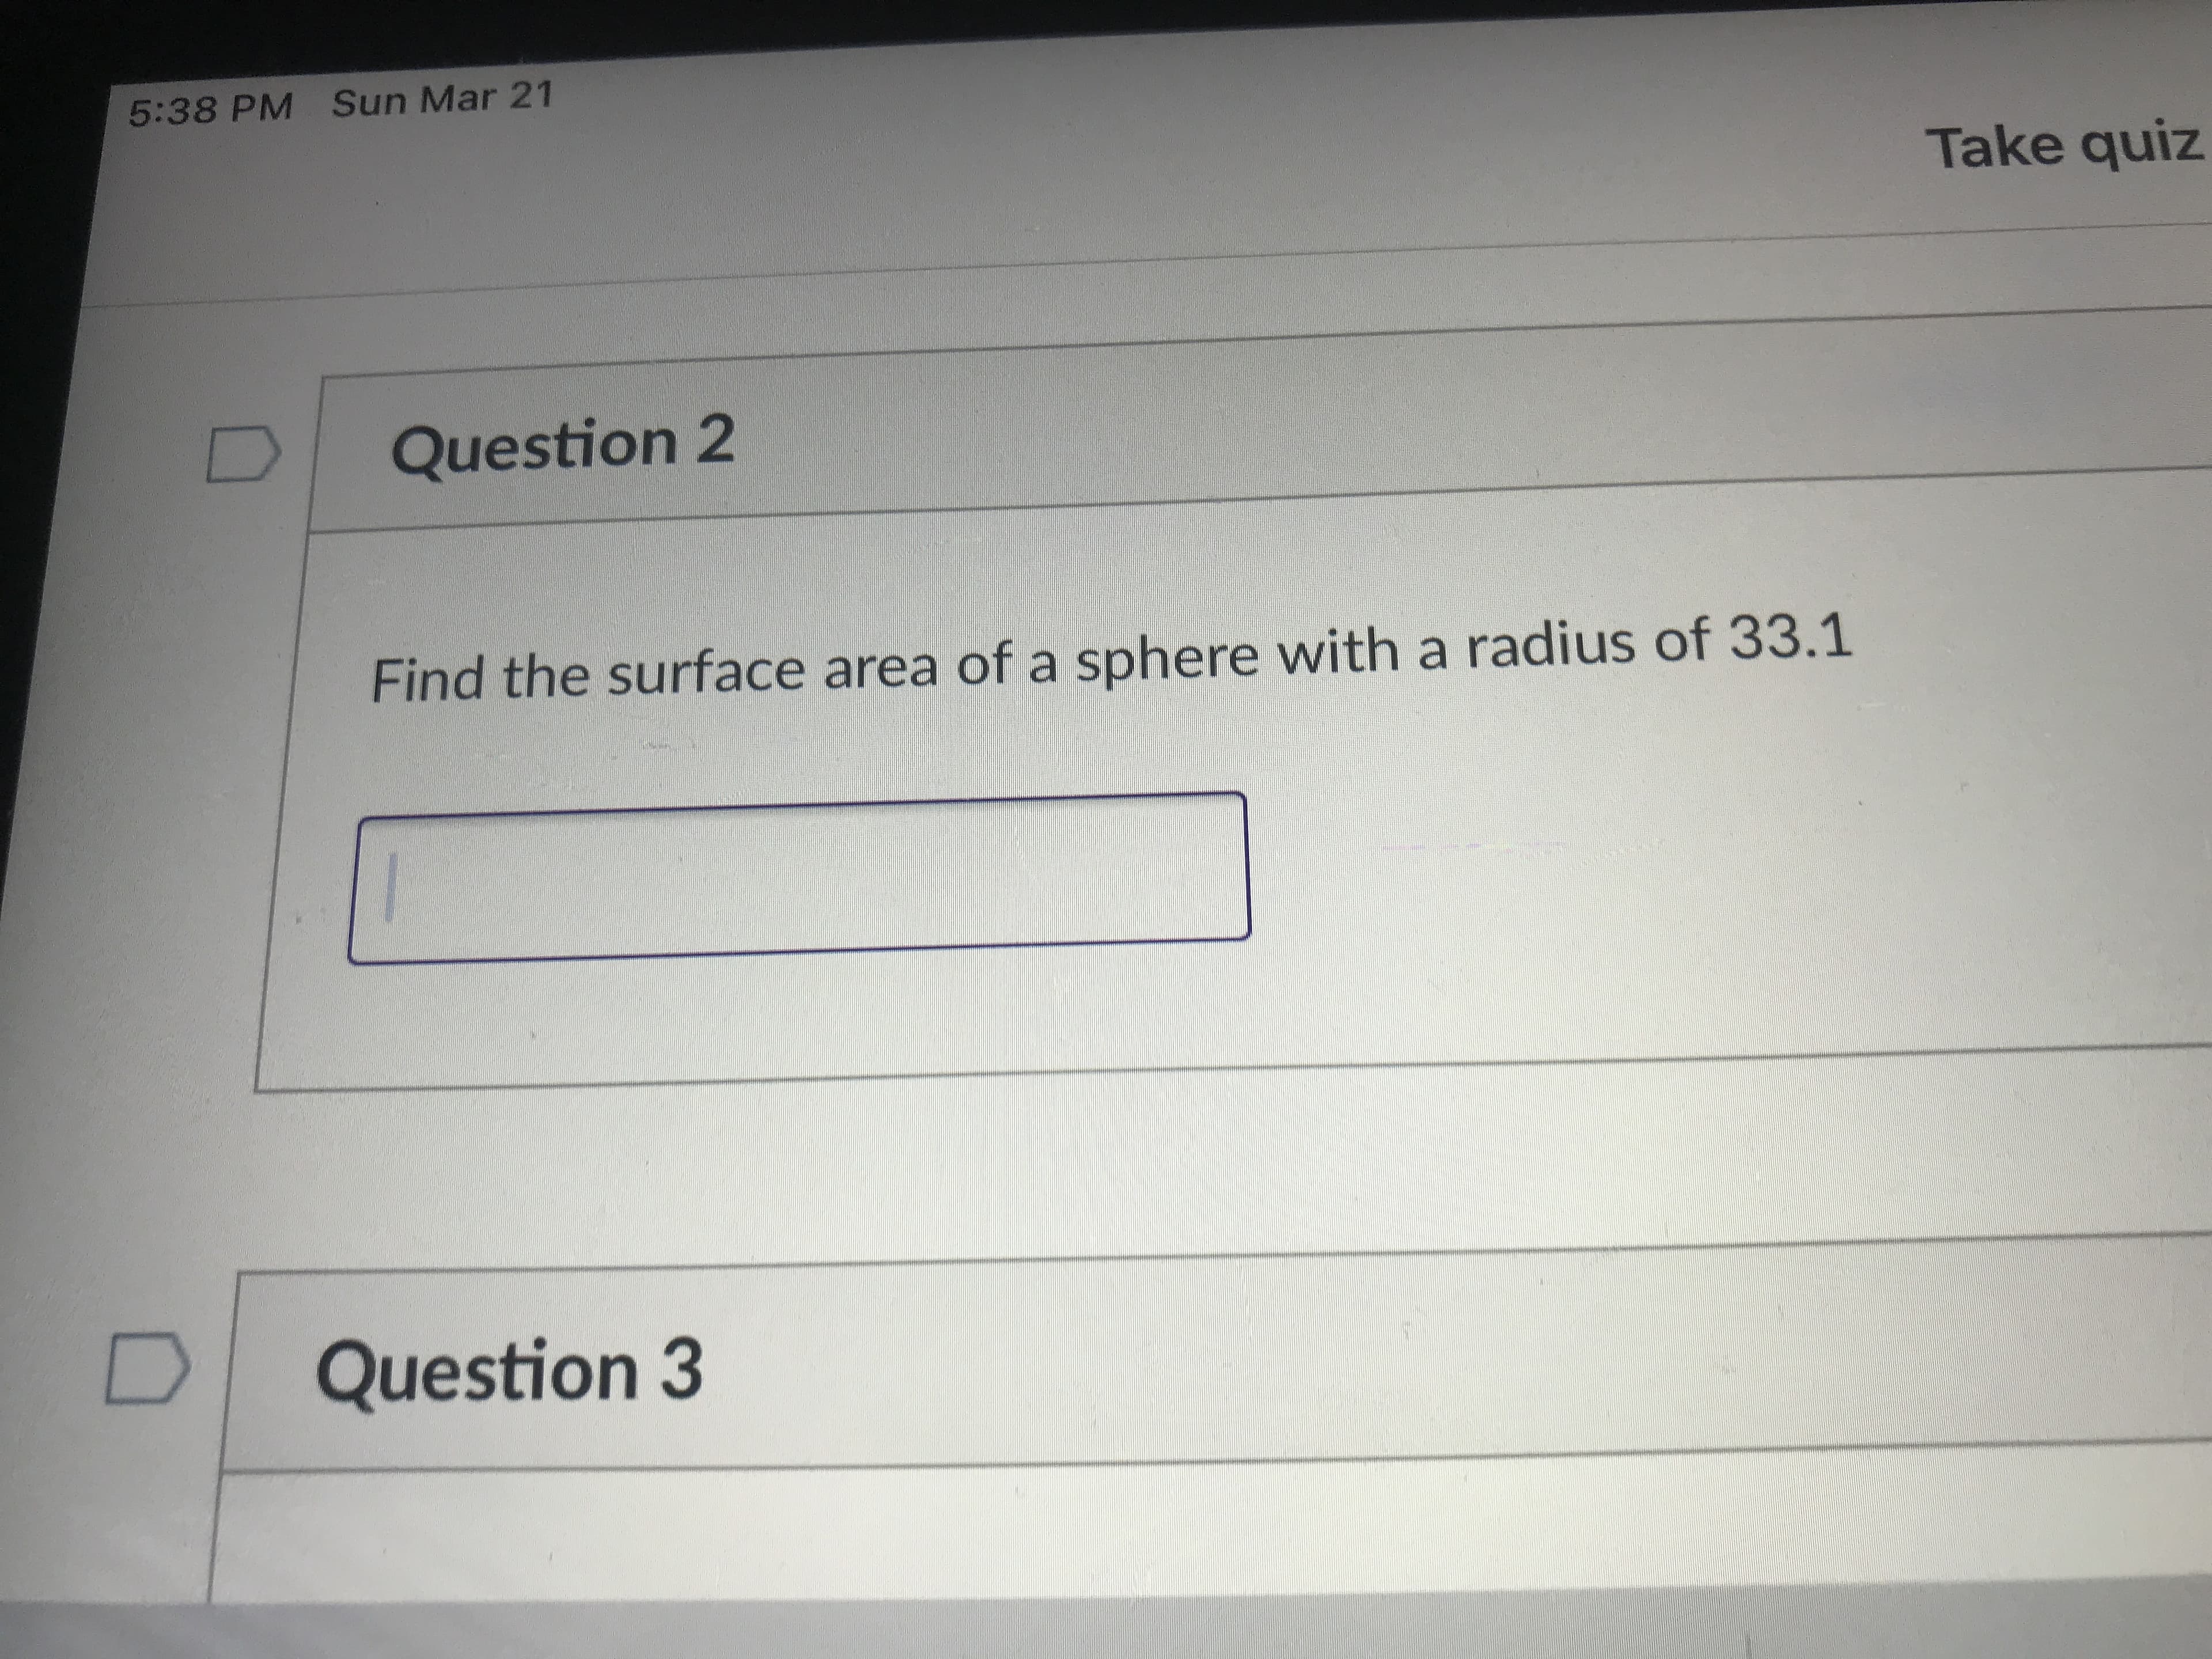 Find the surface area of a sphere with a radius of 33.1
